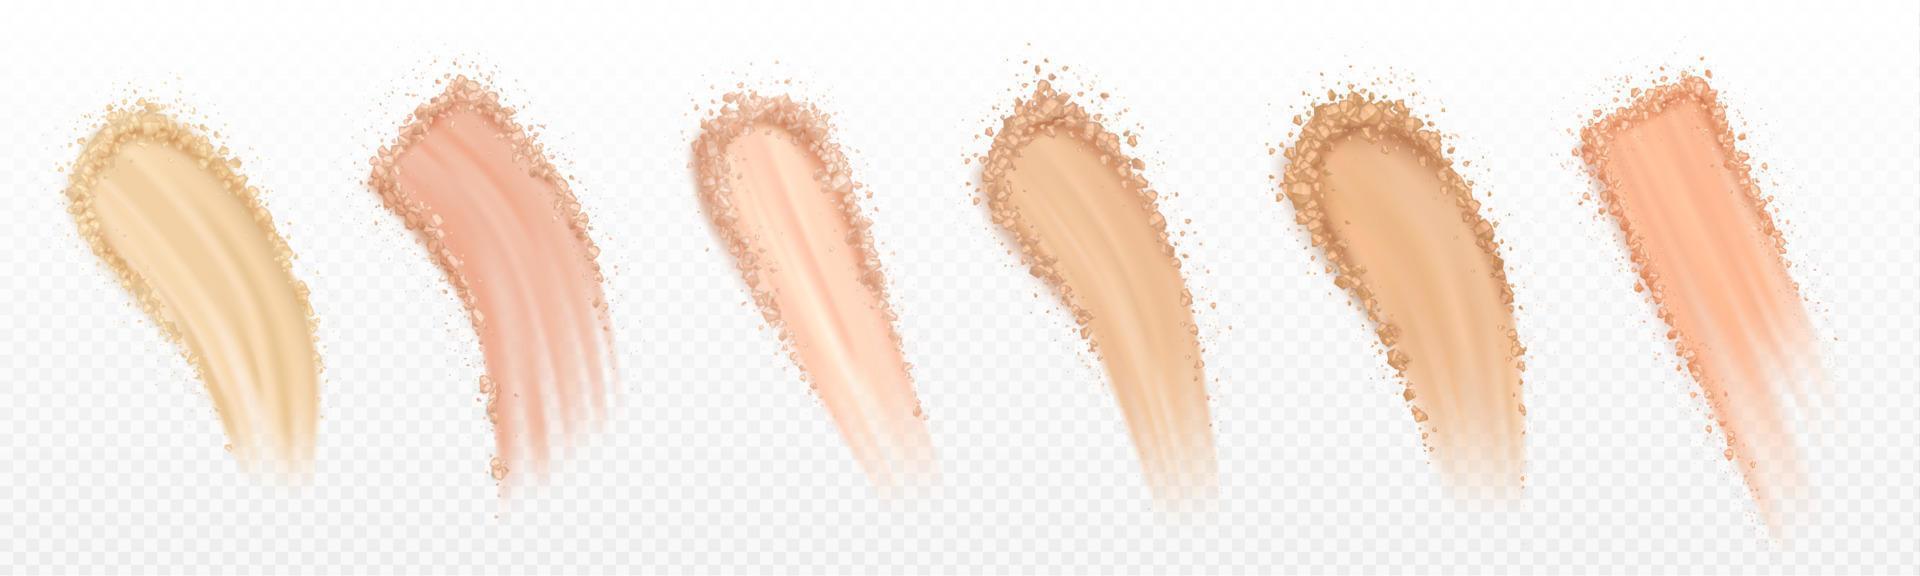 Brown eyeshadow smear. Cosmetic swatch texture vector